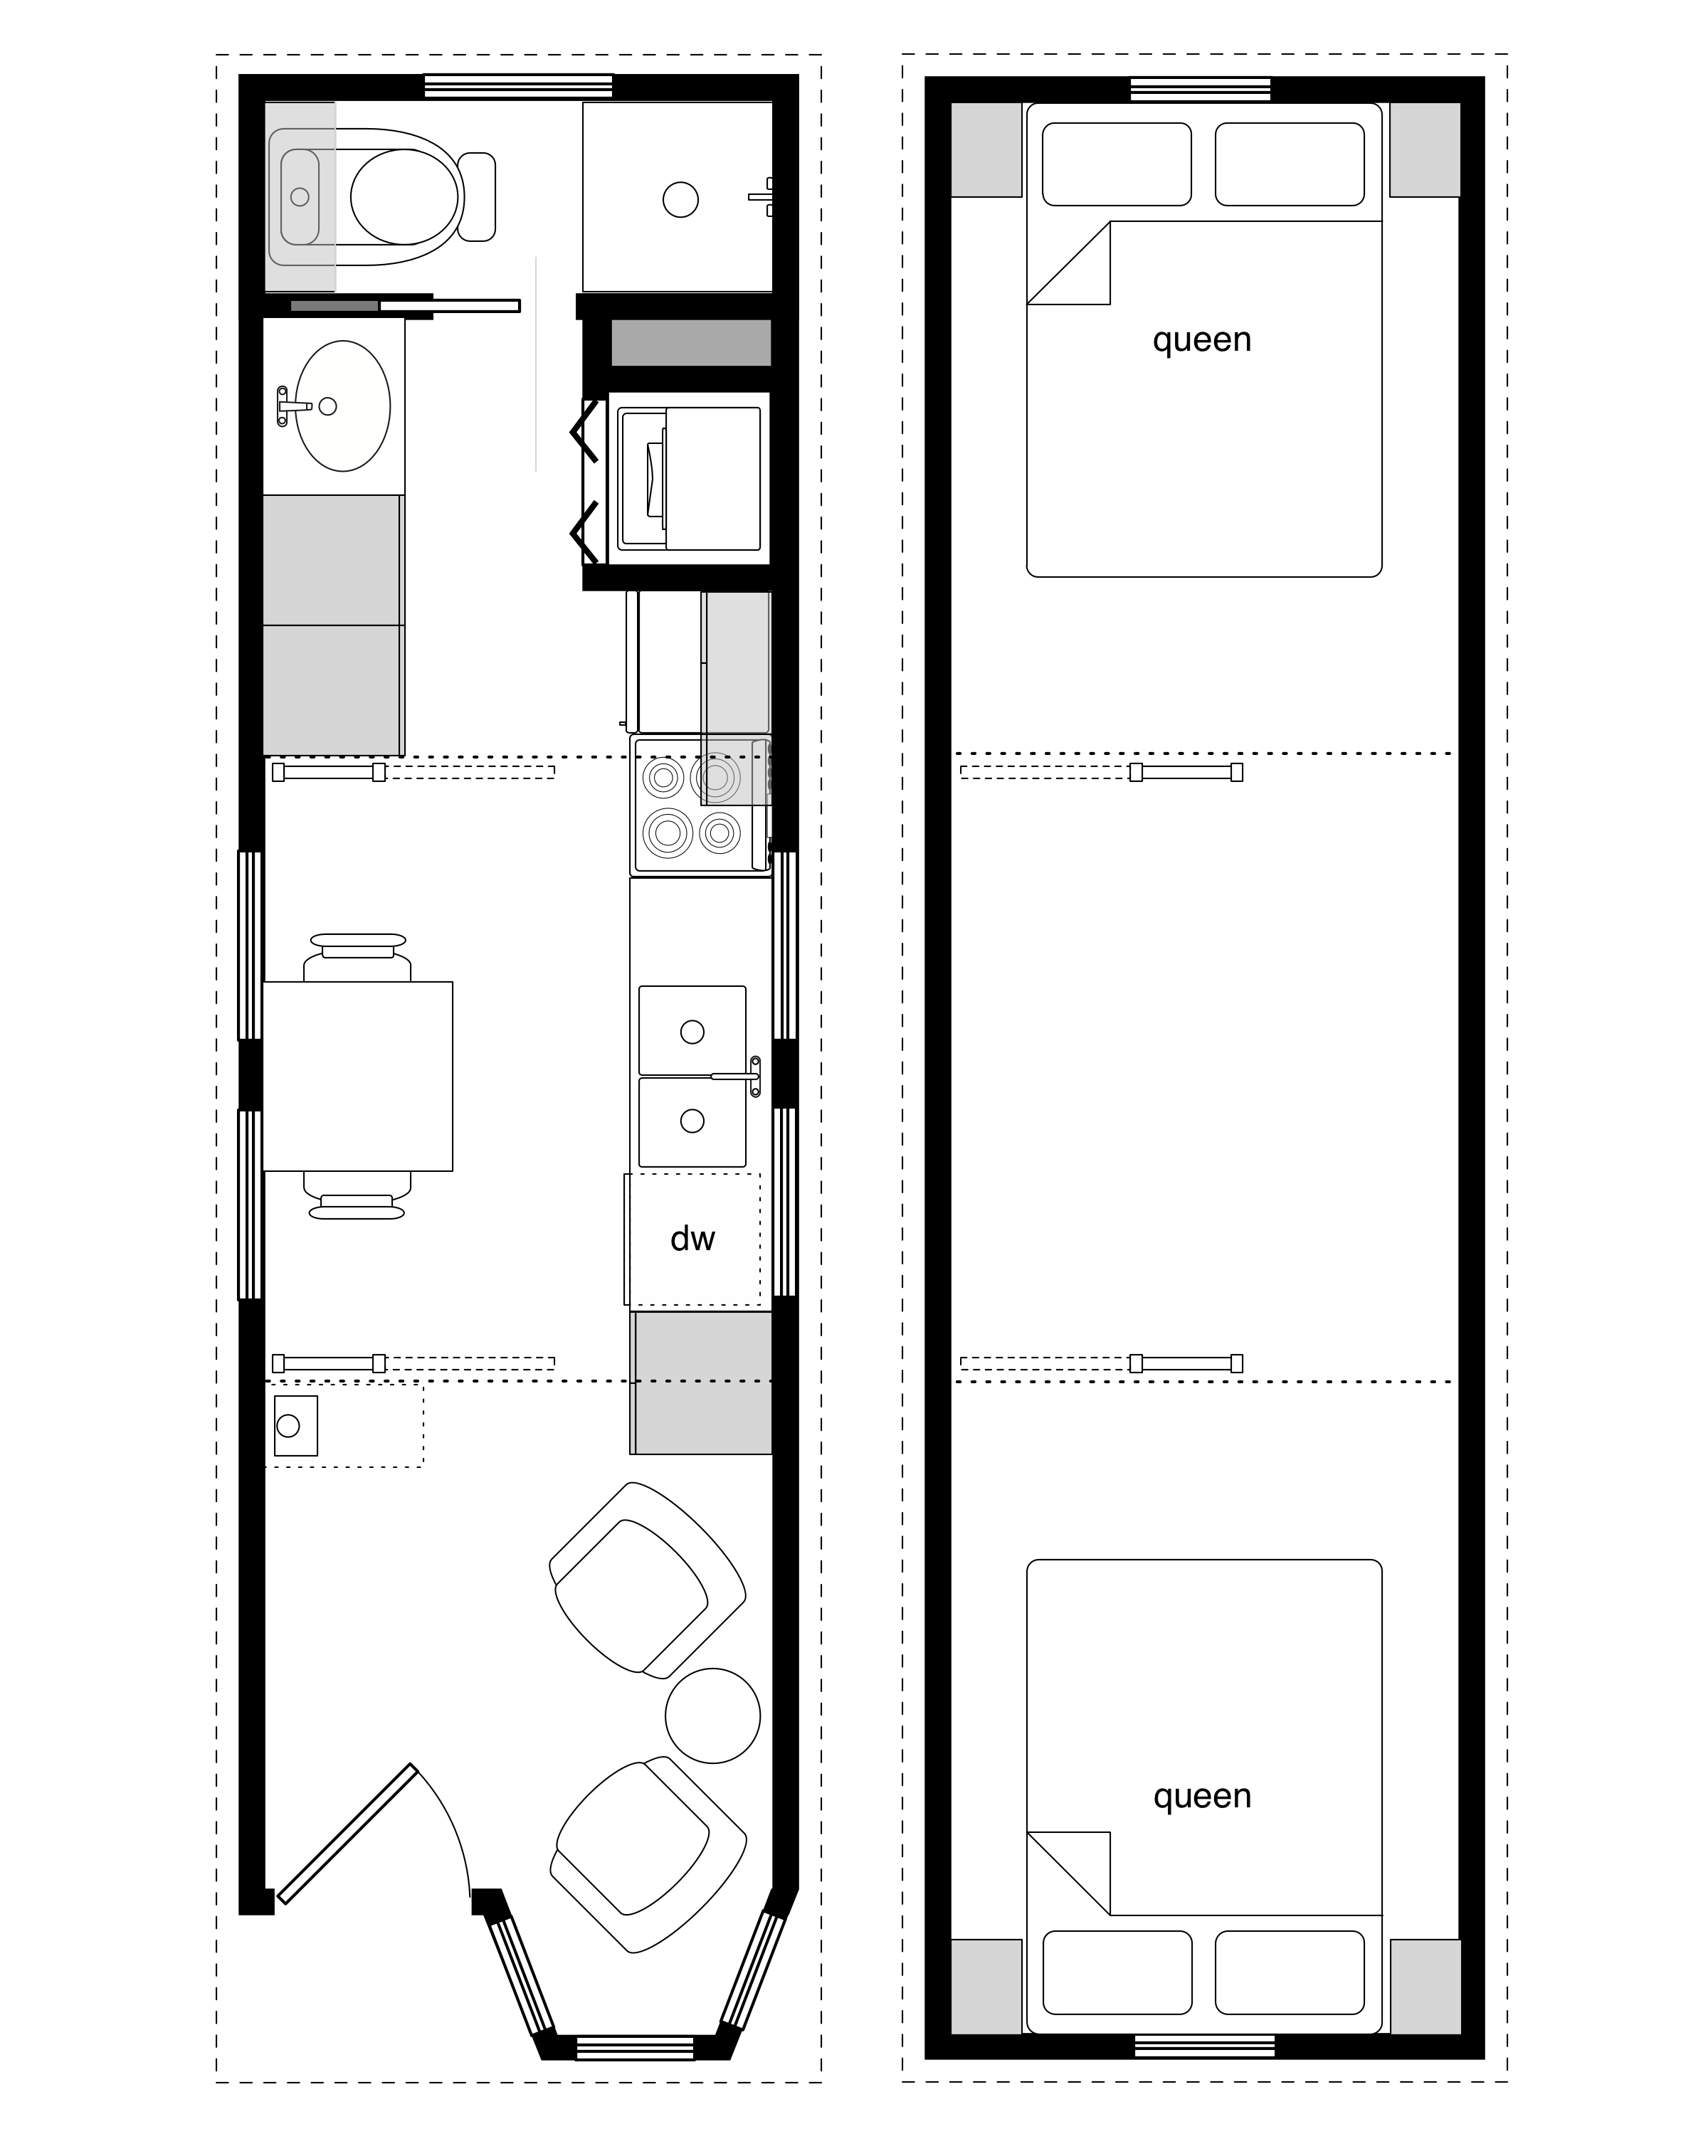 Sample Floor Plans for the 8x28 Coastal Cottage Tiny